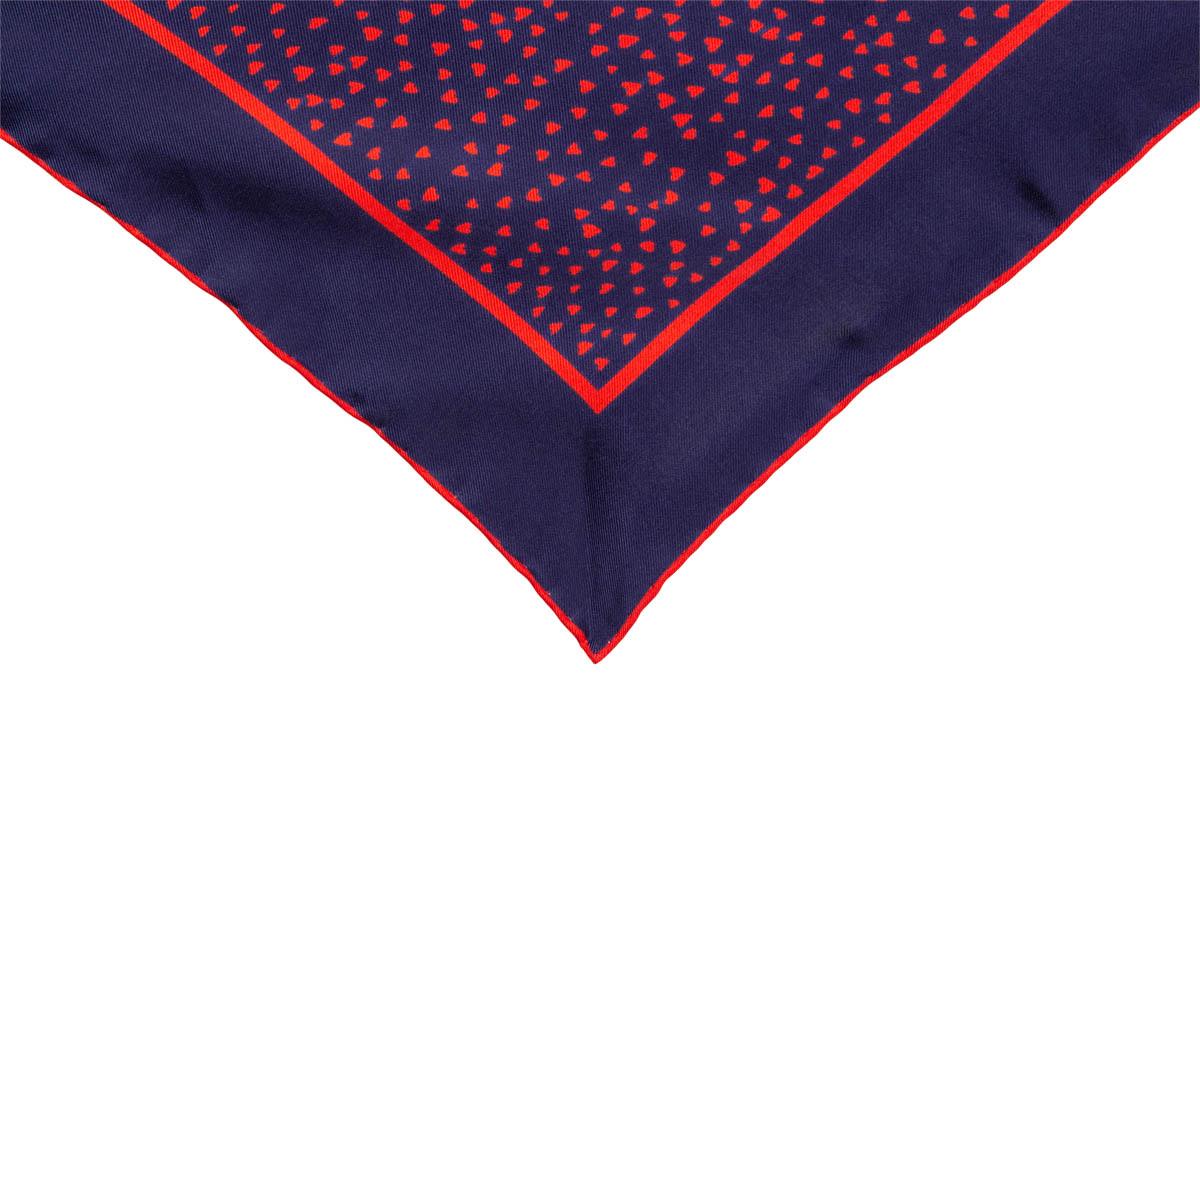 100% authentic Christian Dior heart-print triangle scarf in navy blue and red silk (100%). Has been worn and is in excellent condition. 

Measurements
Width	60cm (23.4in)
Length	130cm (50.7in)

All our listings include only the listed item unless